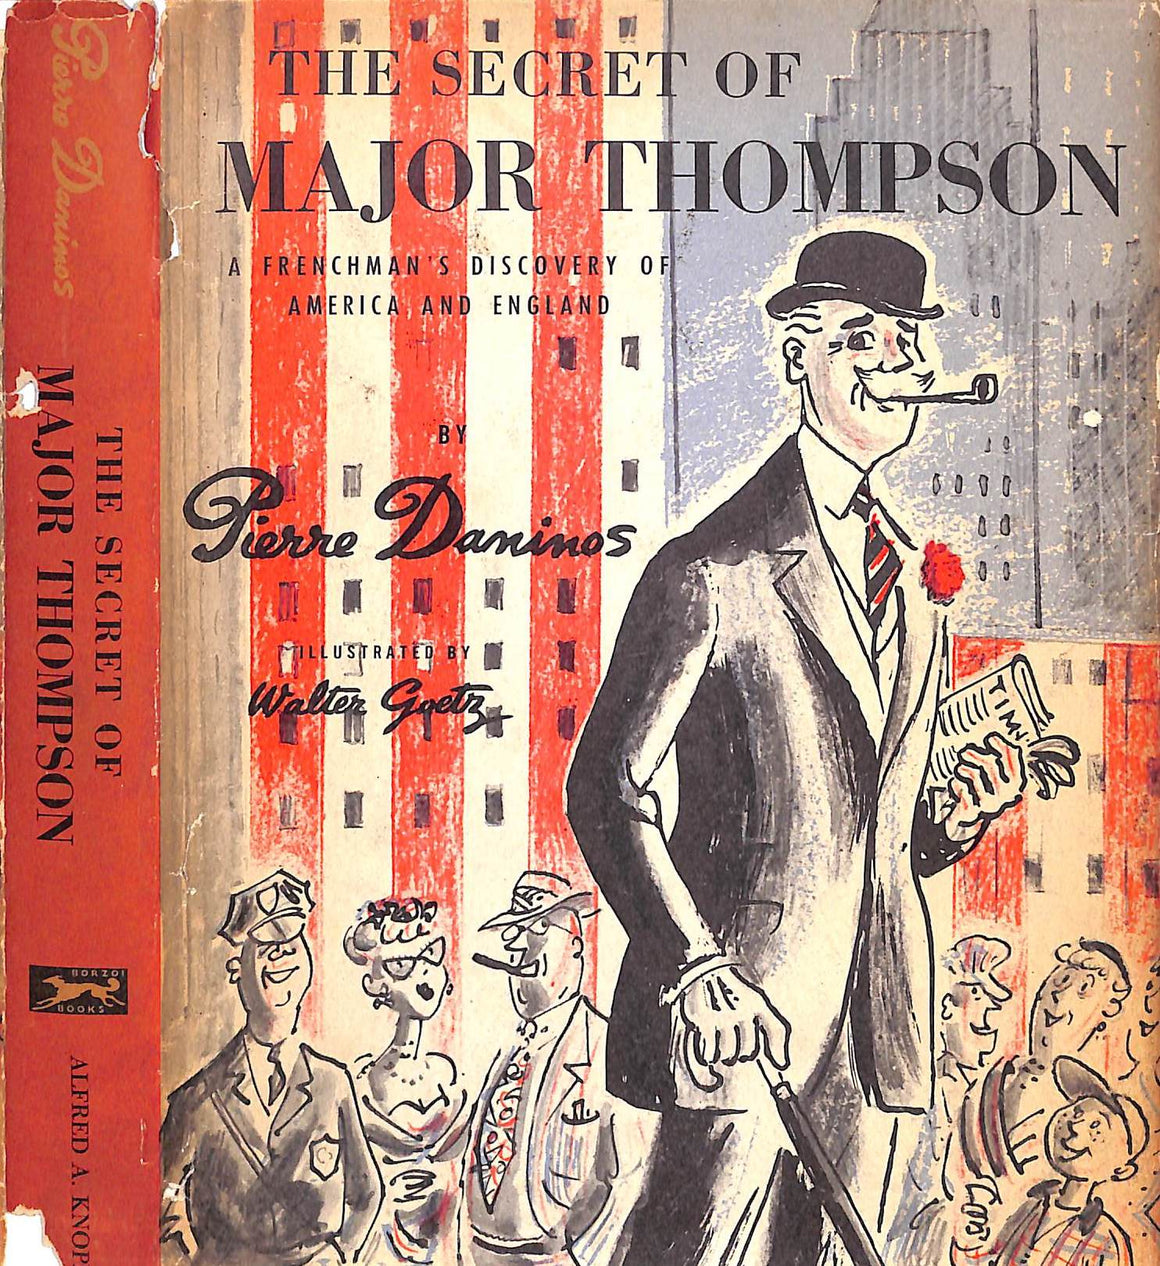 "The Secret Of Major Thompson A Frenchman's Discovery Of America And England" 1957 DANINOS, Pierre